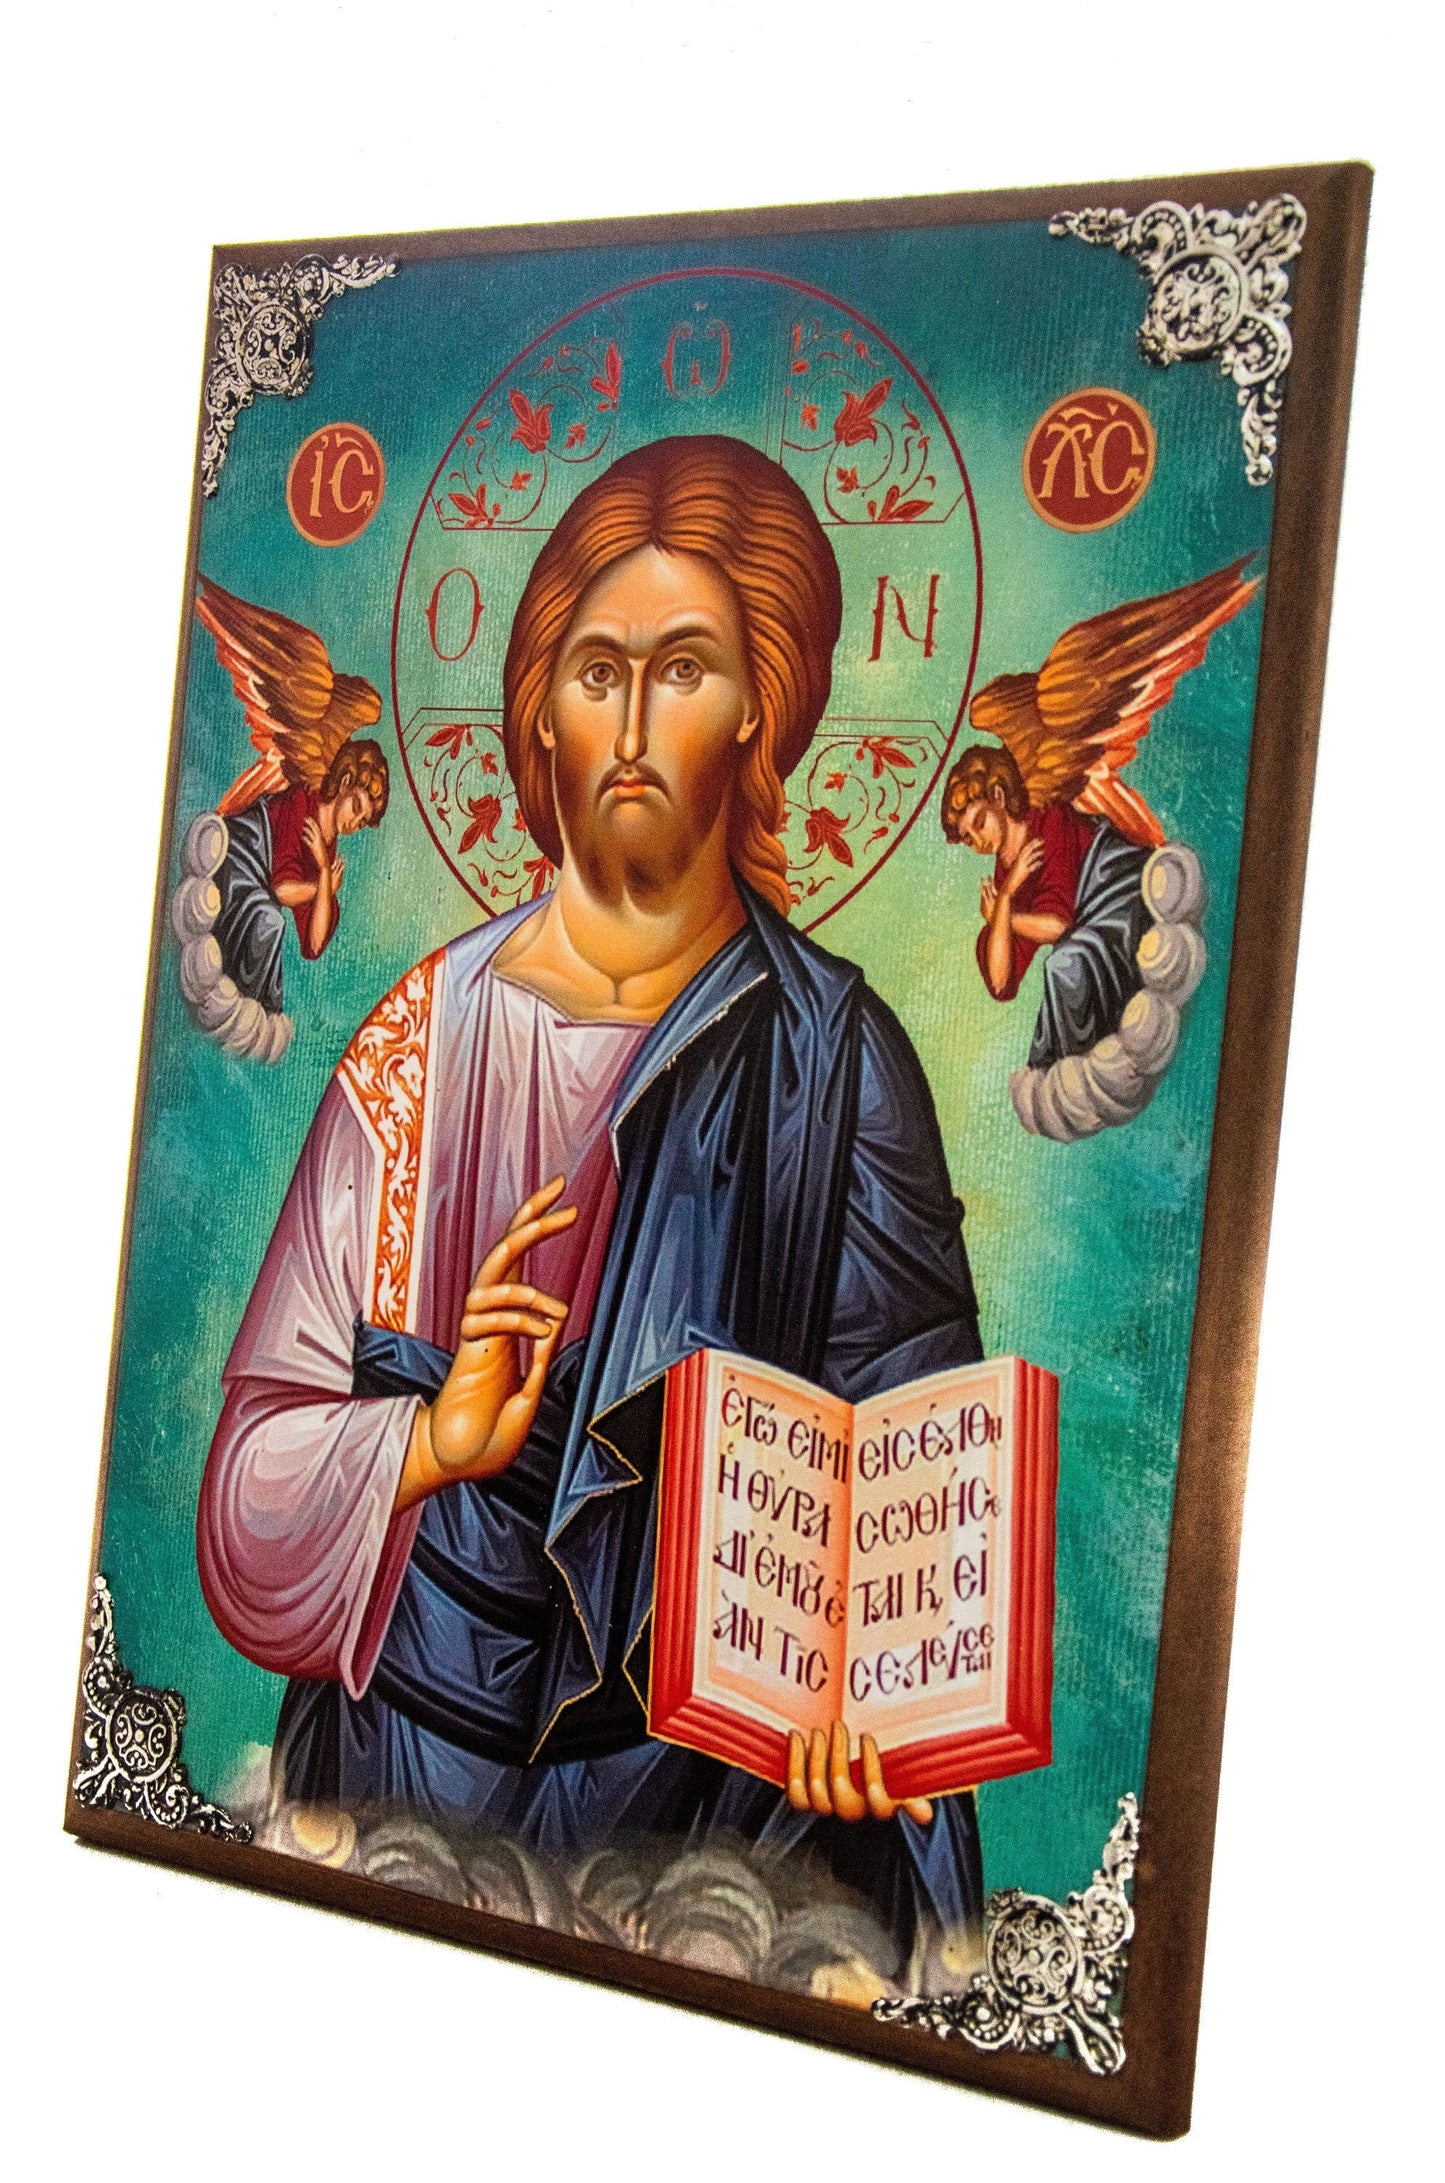 Jesus Christ icon, Handmade Greek Orthodox icon of our Lord, Byzantine art wall hanging wood plaque TheHolyArt